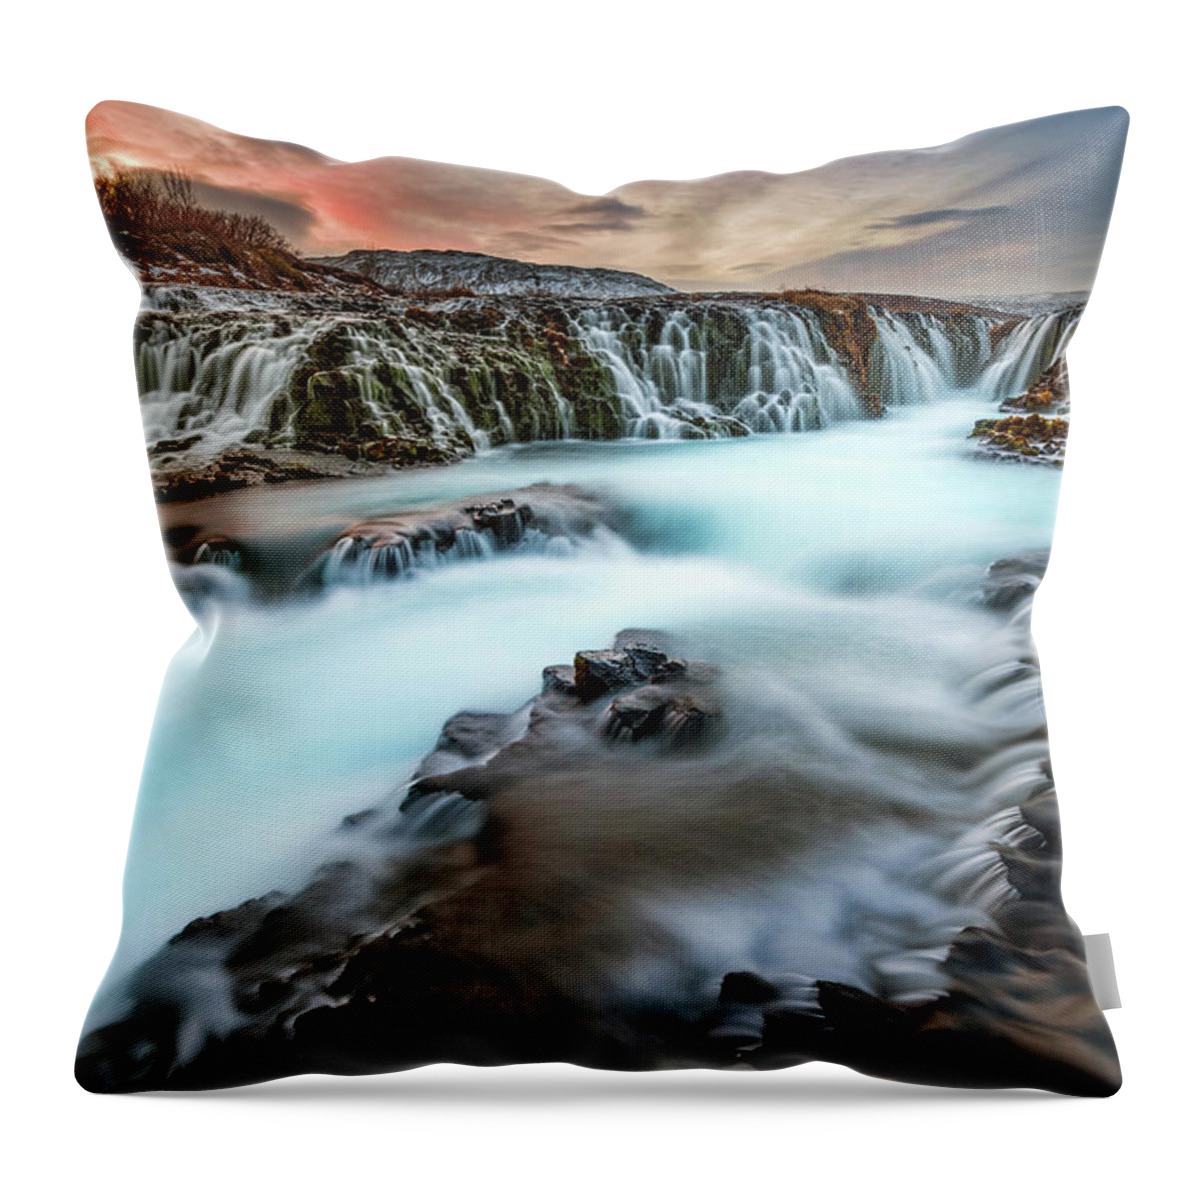 Scenics Throw Pillow featuring the photograph Iceland Waterfalls by Noppawat Tom Charoensinphon